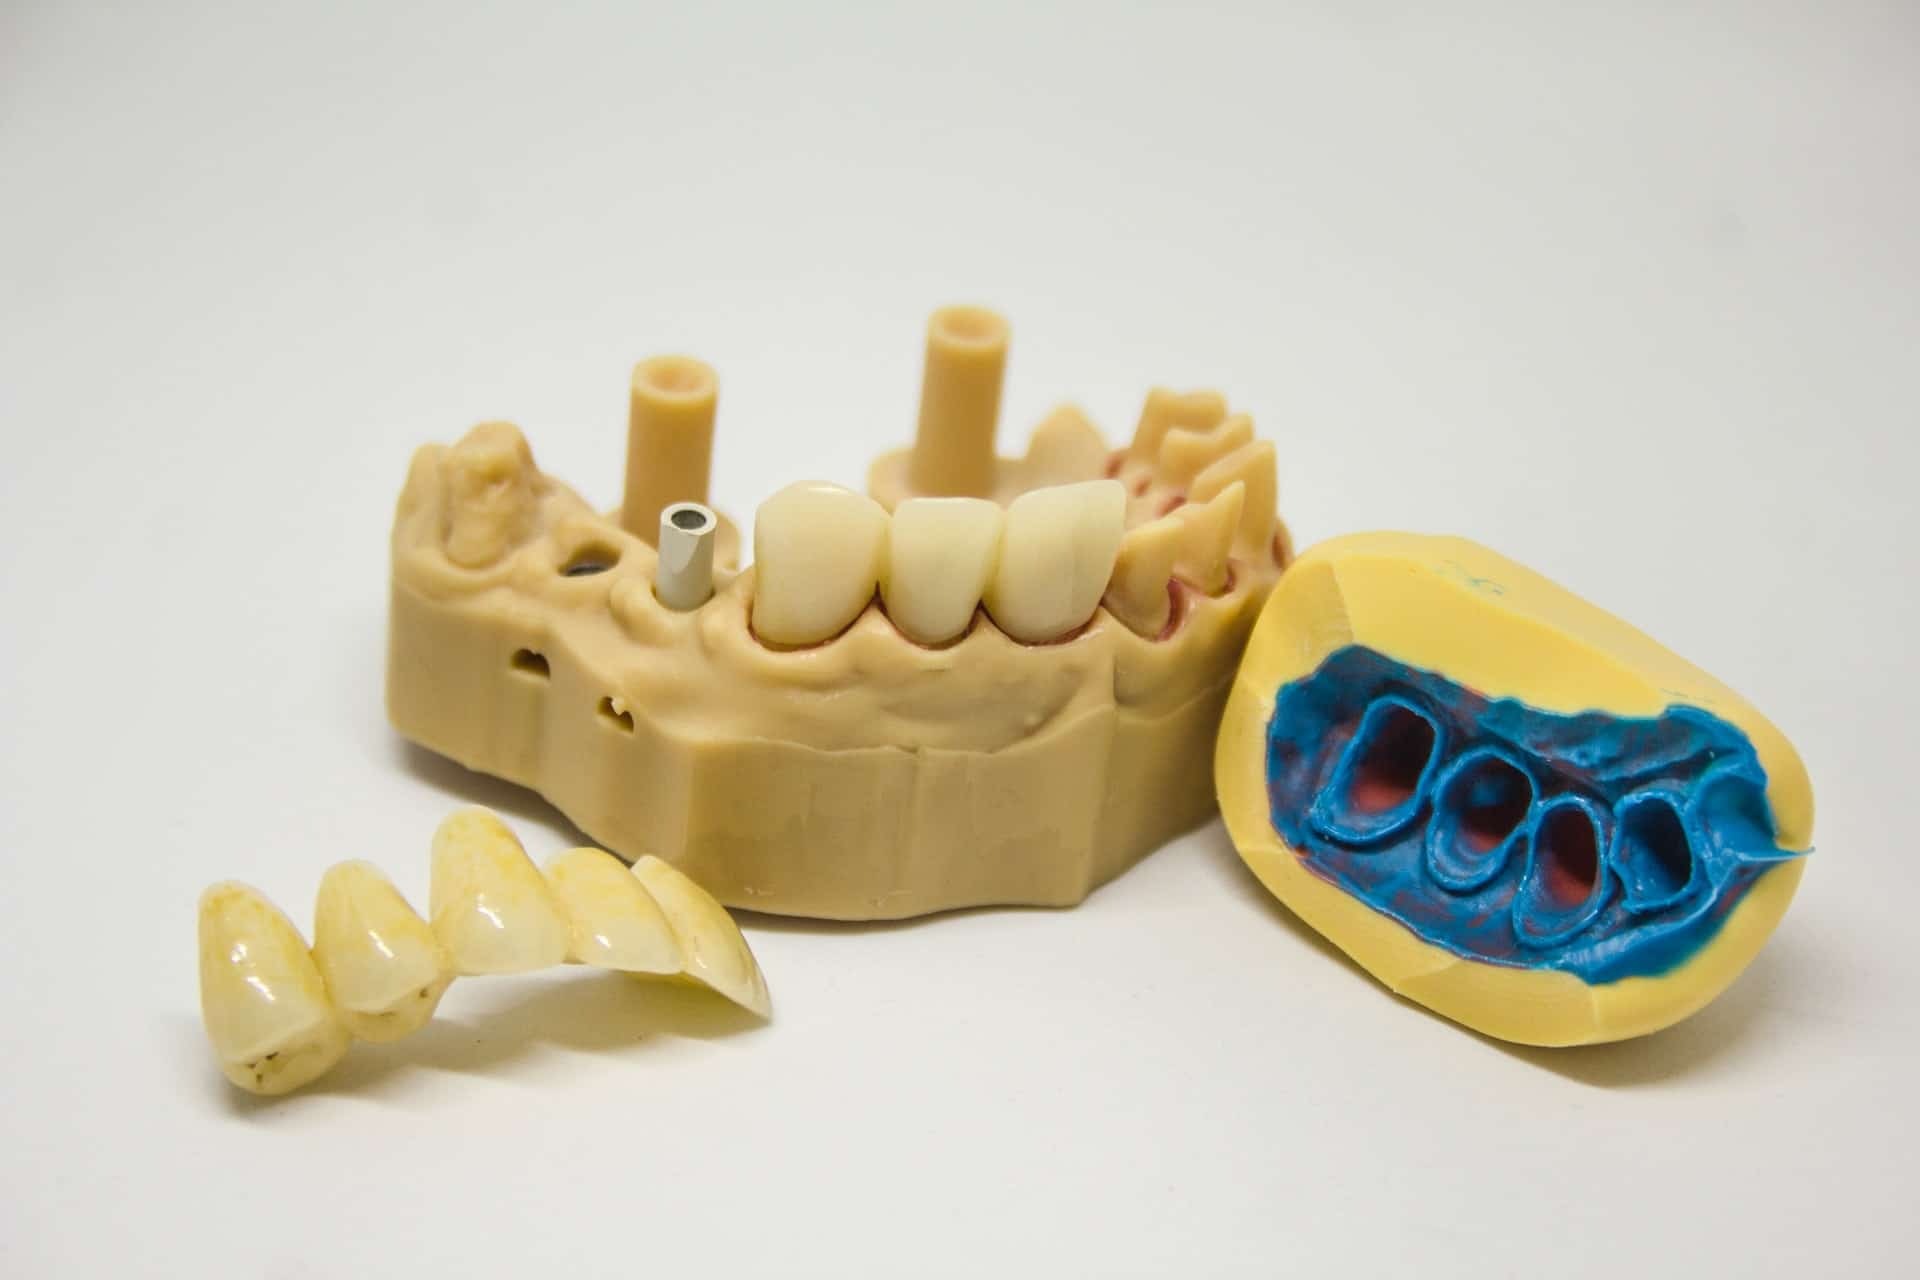 tooth extraction - model of the lower jaw and tooth extraction example